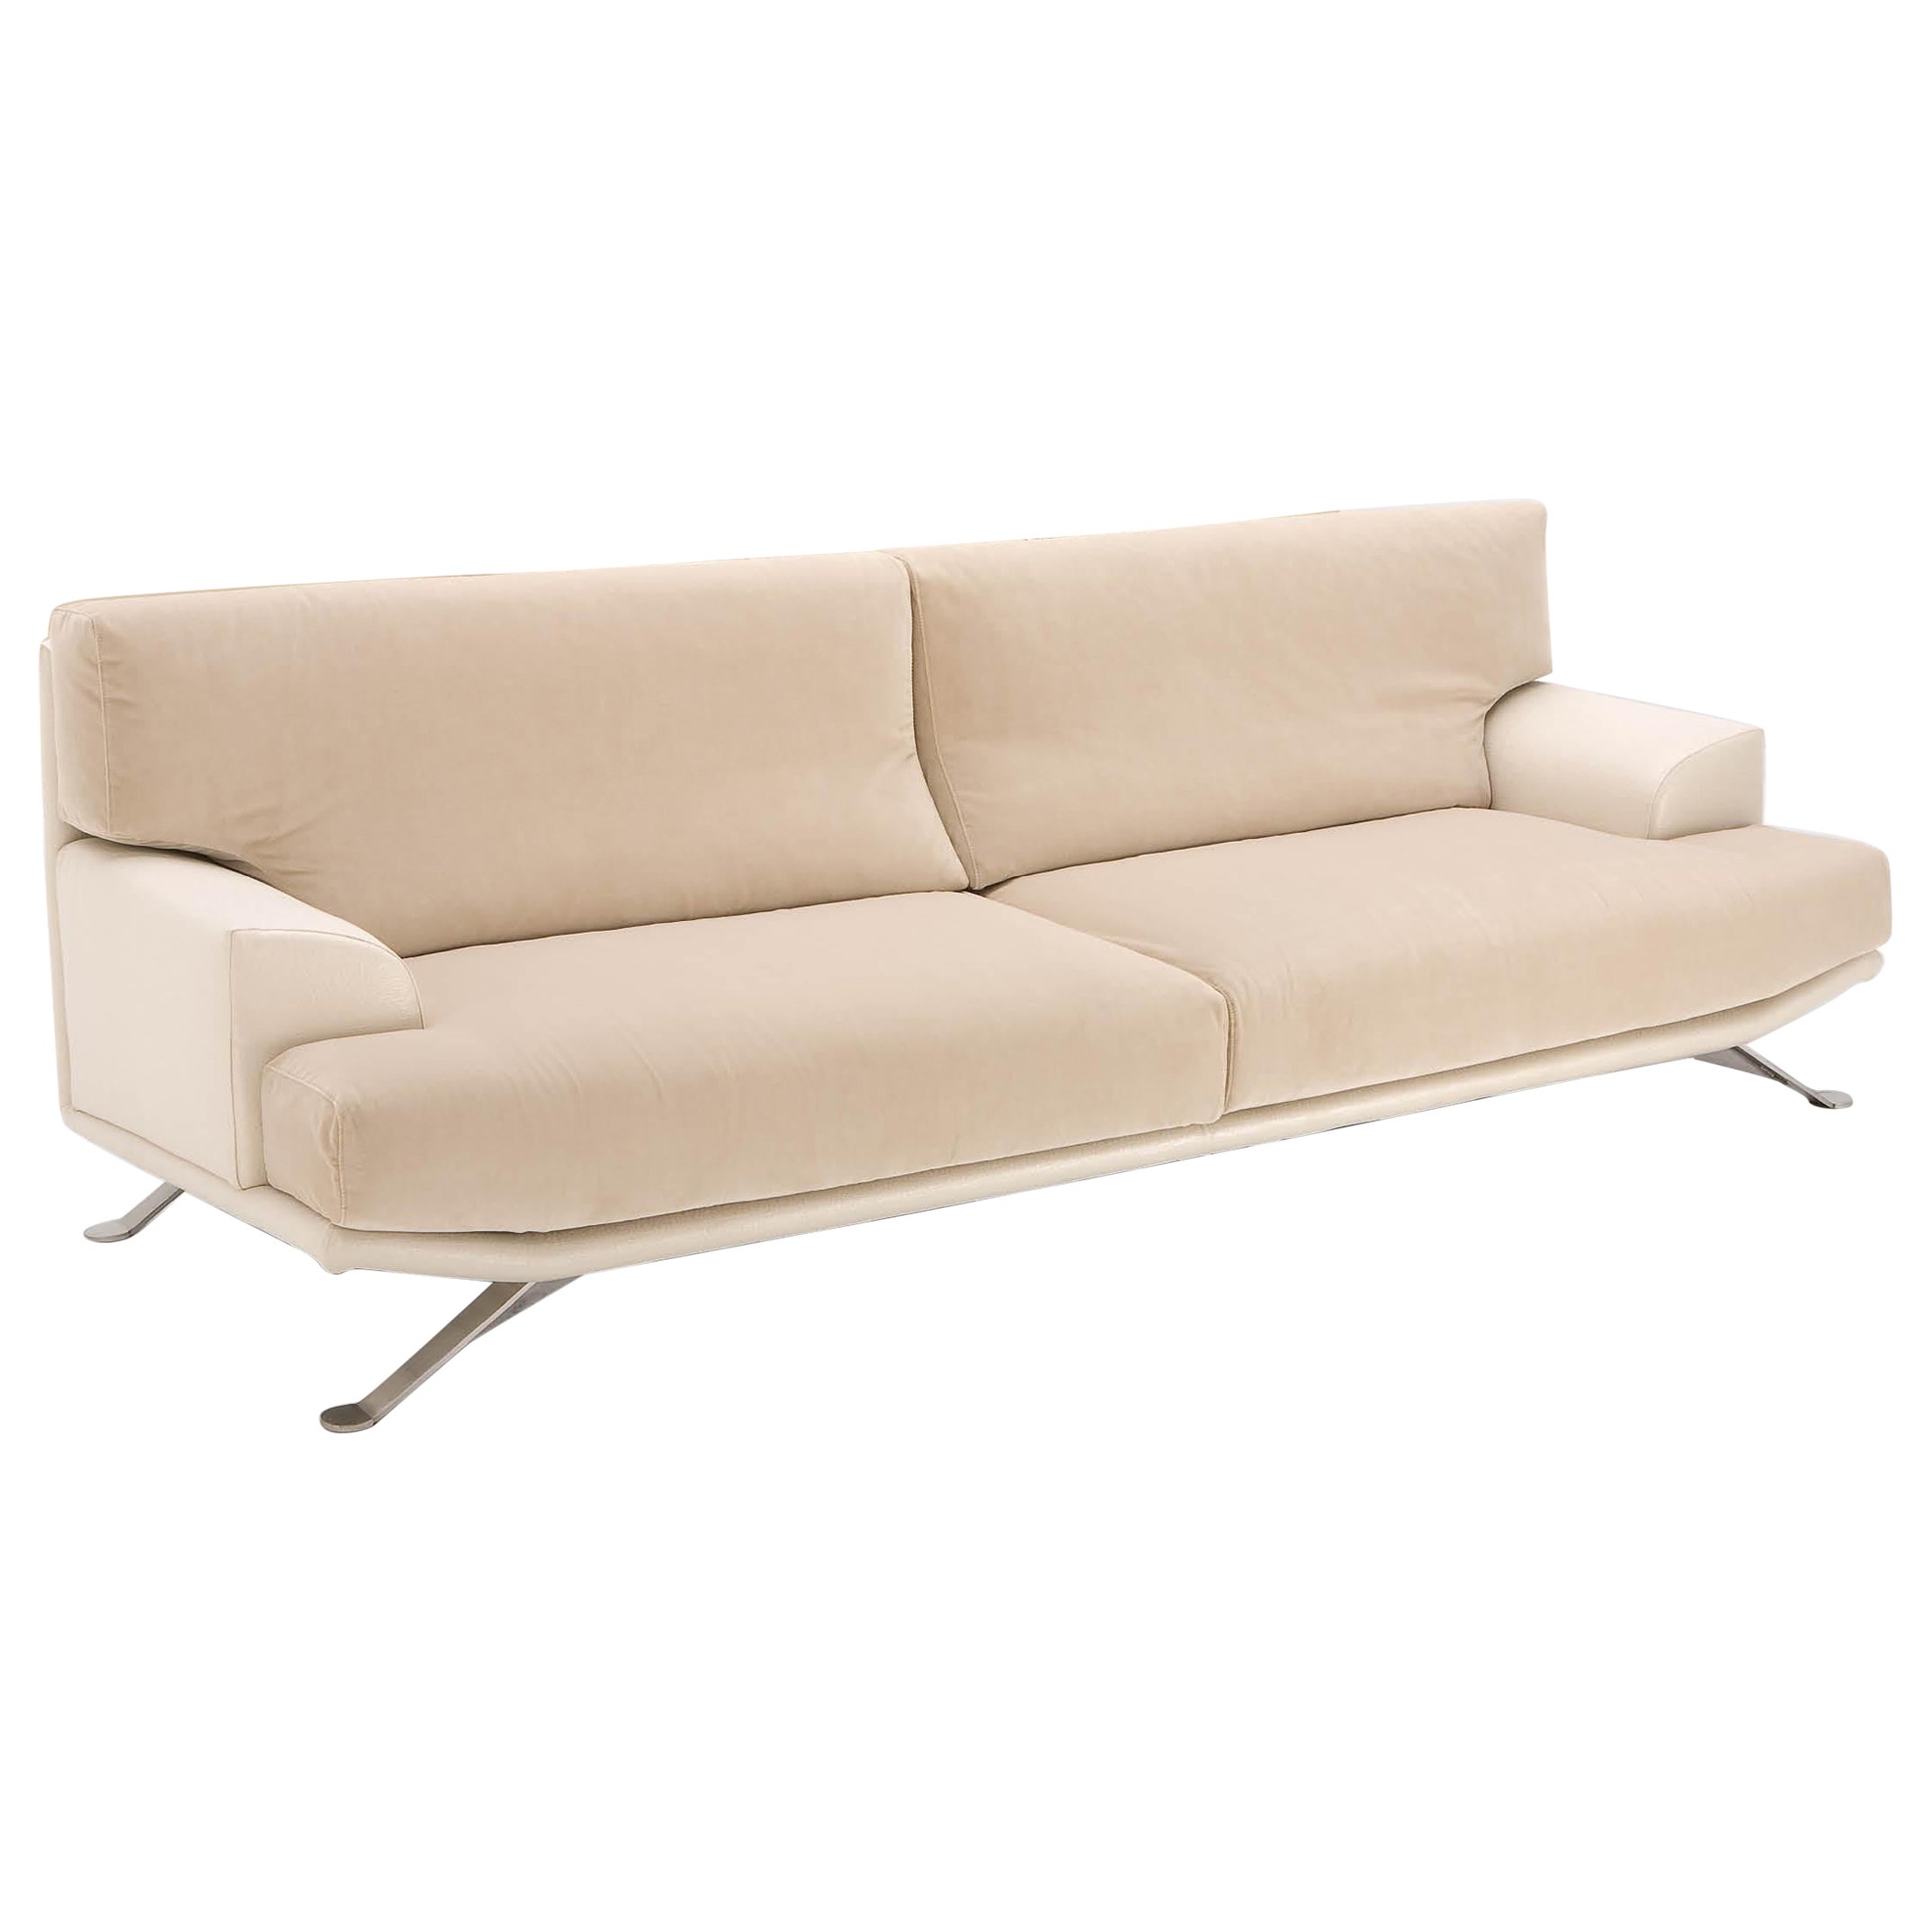 Giovannetti, Contemporary 2 Seater Sofa from the 1970s by P. Piva Cream "Boss"